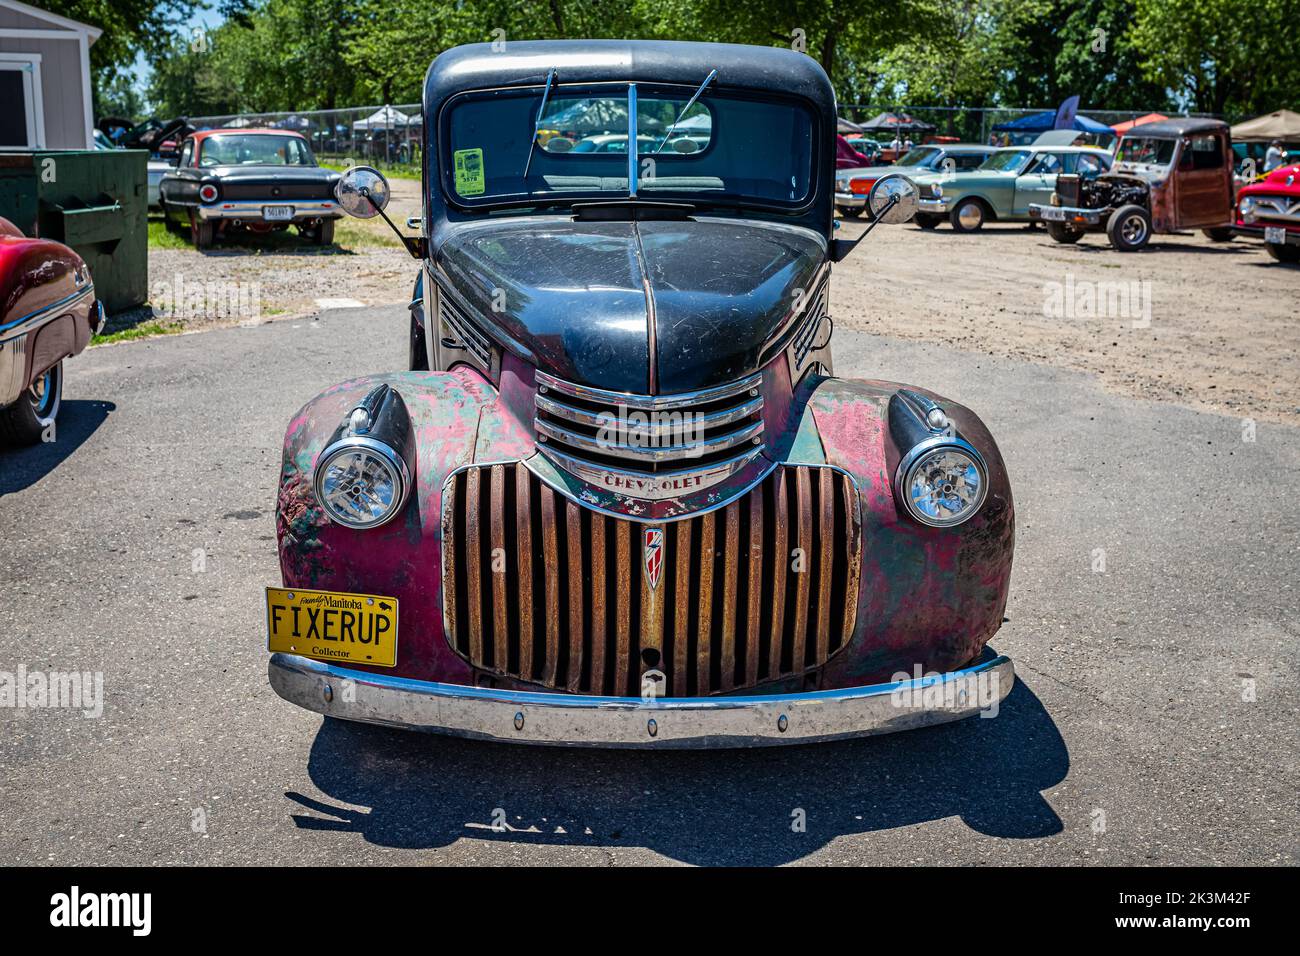 Falcon Heights, MN - June 18, 2022: High perspective front view of a 1946 Chevrolet AK Series Pickup Truck at a local car show. Stock Photo